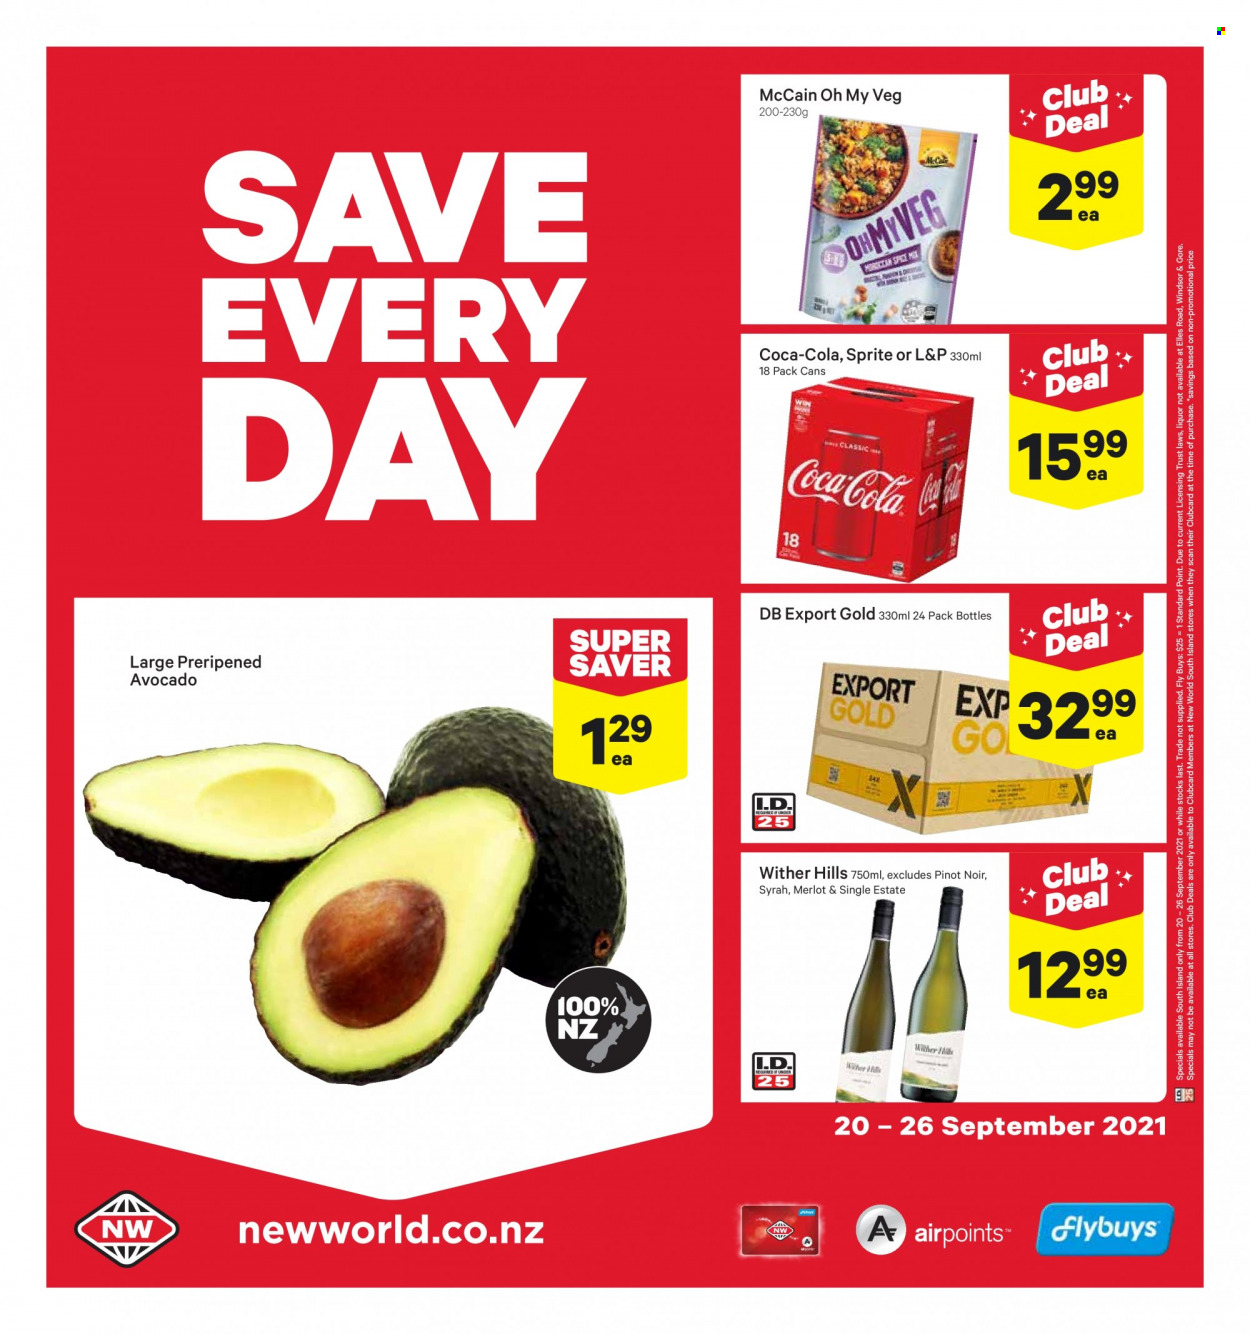 thumbnail - New World mailer - 20.09.2021 - 26.09.2021 - Sales products - avocado, McCain, spice, Coca-Cola, Sprite, L&P, red wine, wine, Merlot, Pinot Noir, Wither Hills, Syrah, Trust, Hill's. Page 16.